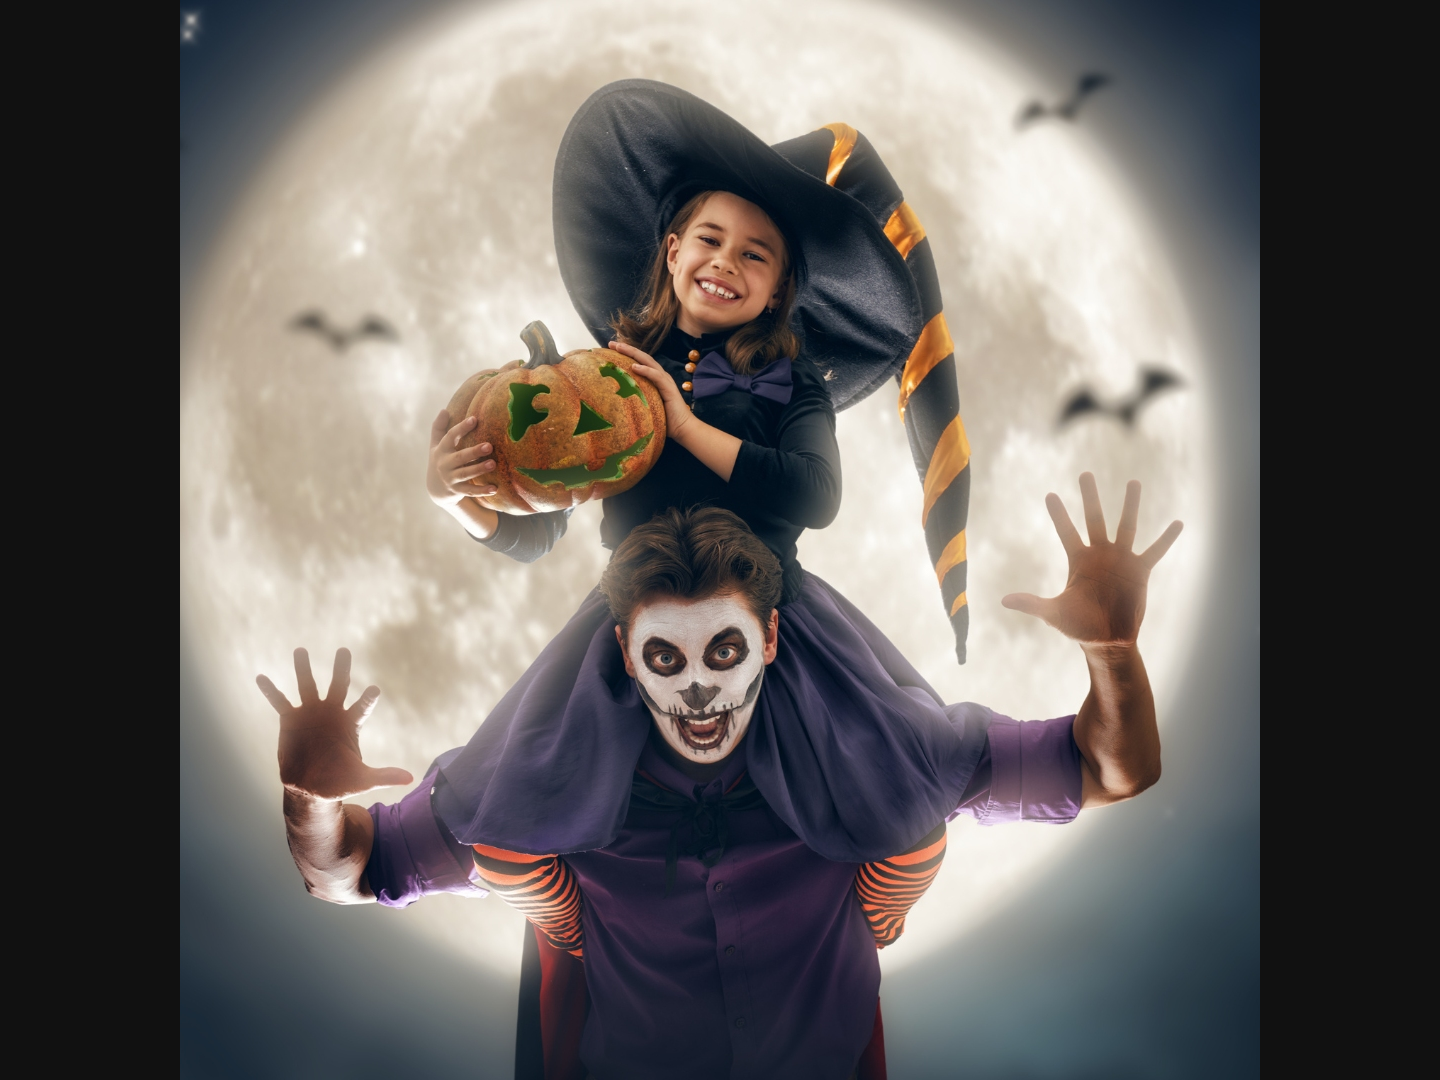 A child dressed in a Halloween costume is sitting on the shoulders of an adult dressed in a Halloween costume.  